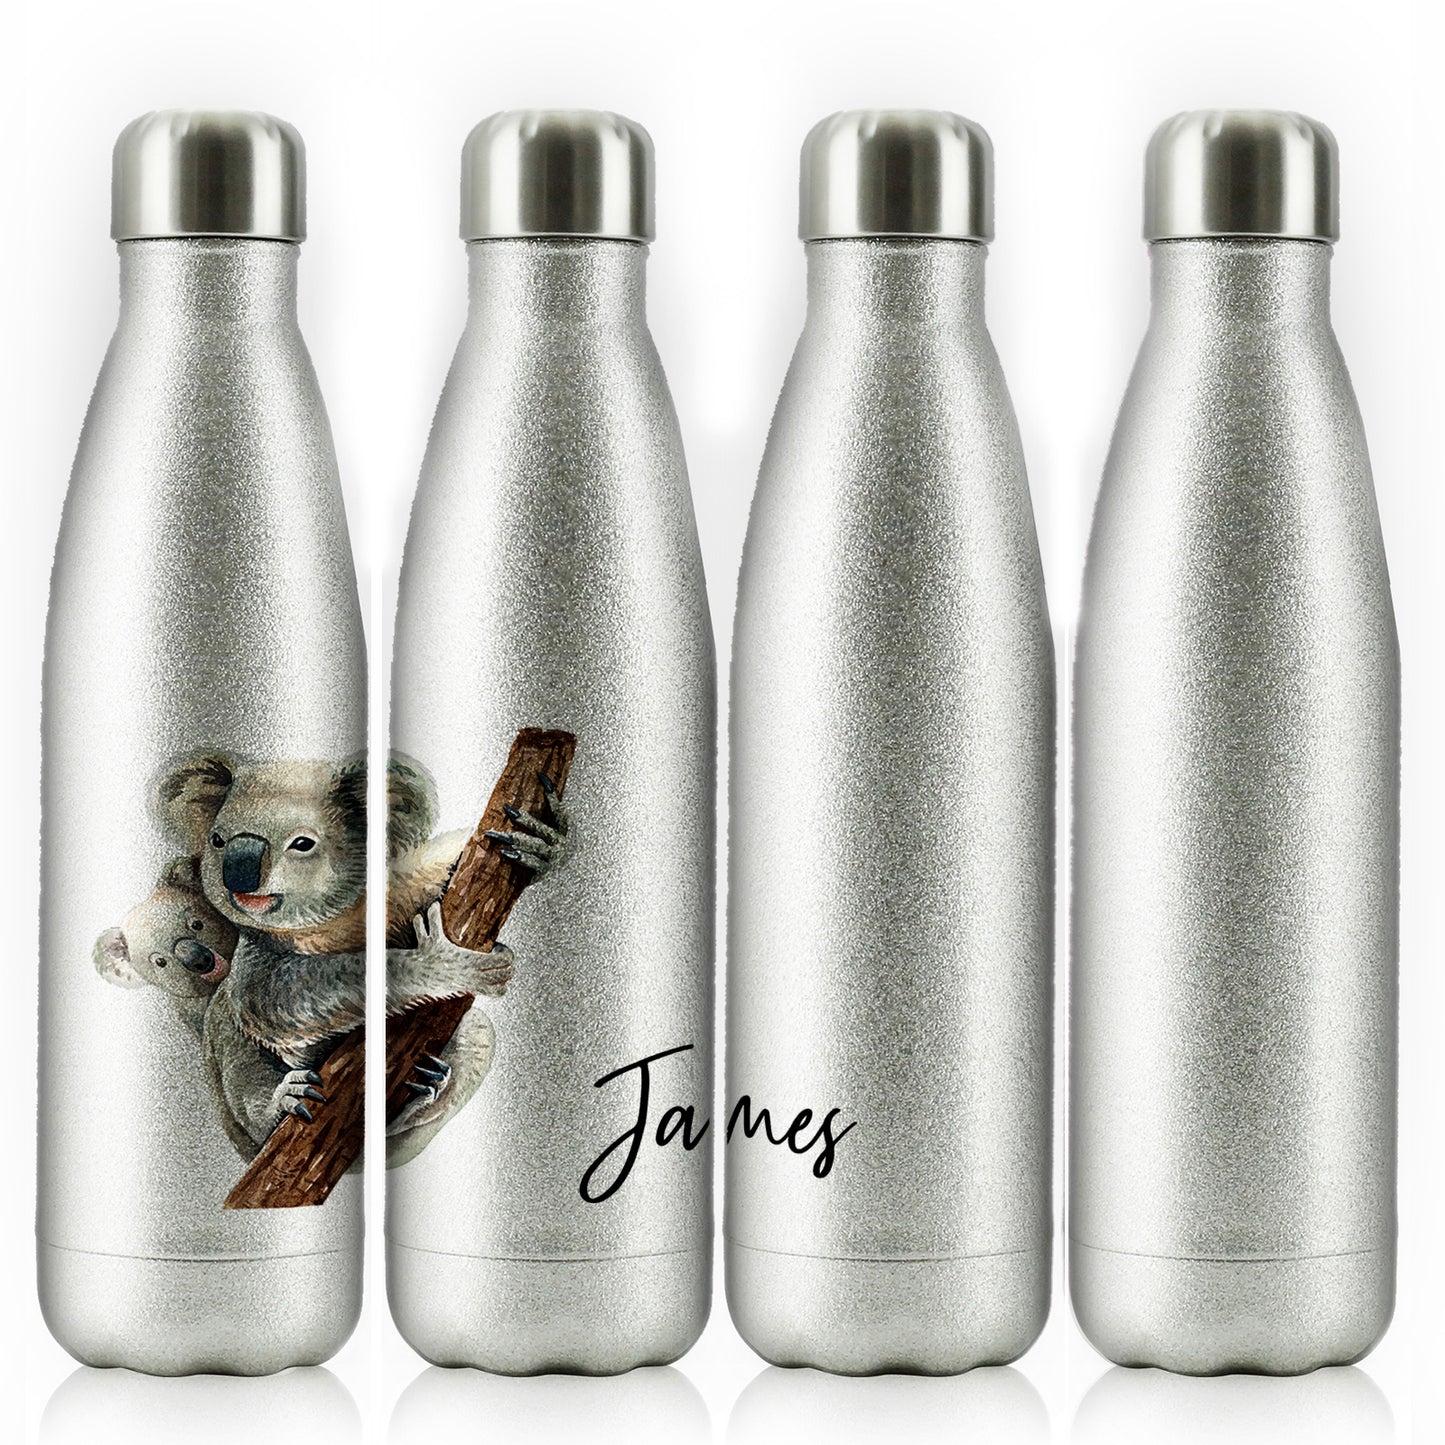 Personalised Cola Bottle with Welcoming Text and Climbing Mum and Baby Koalas